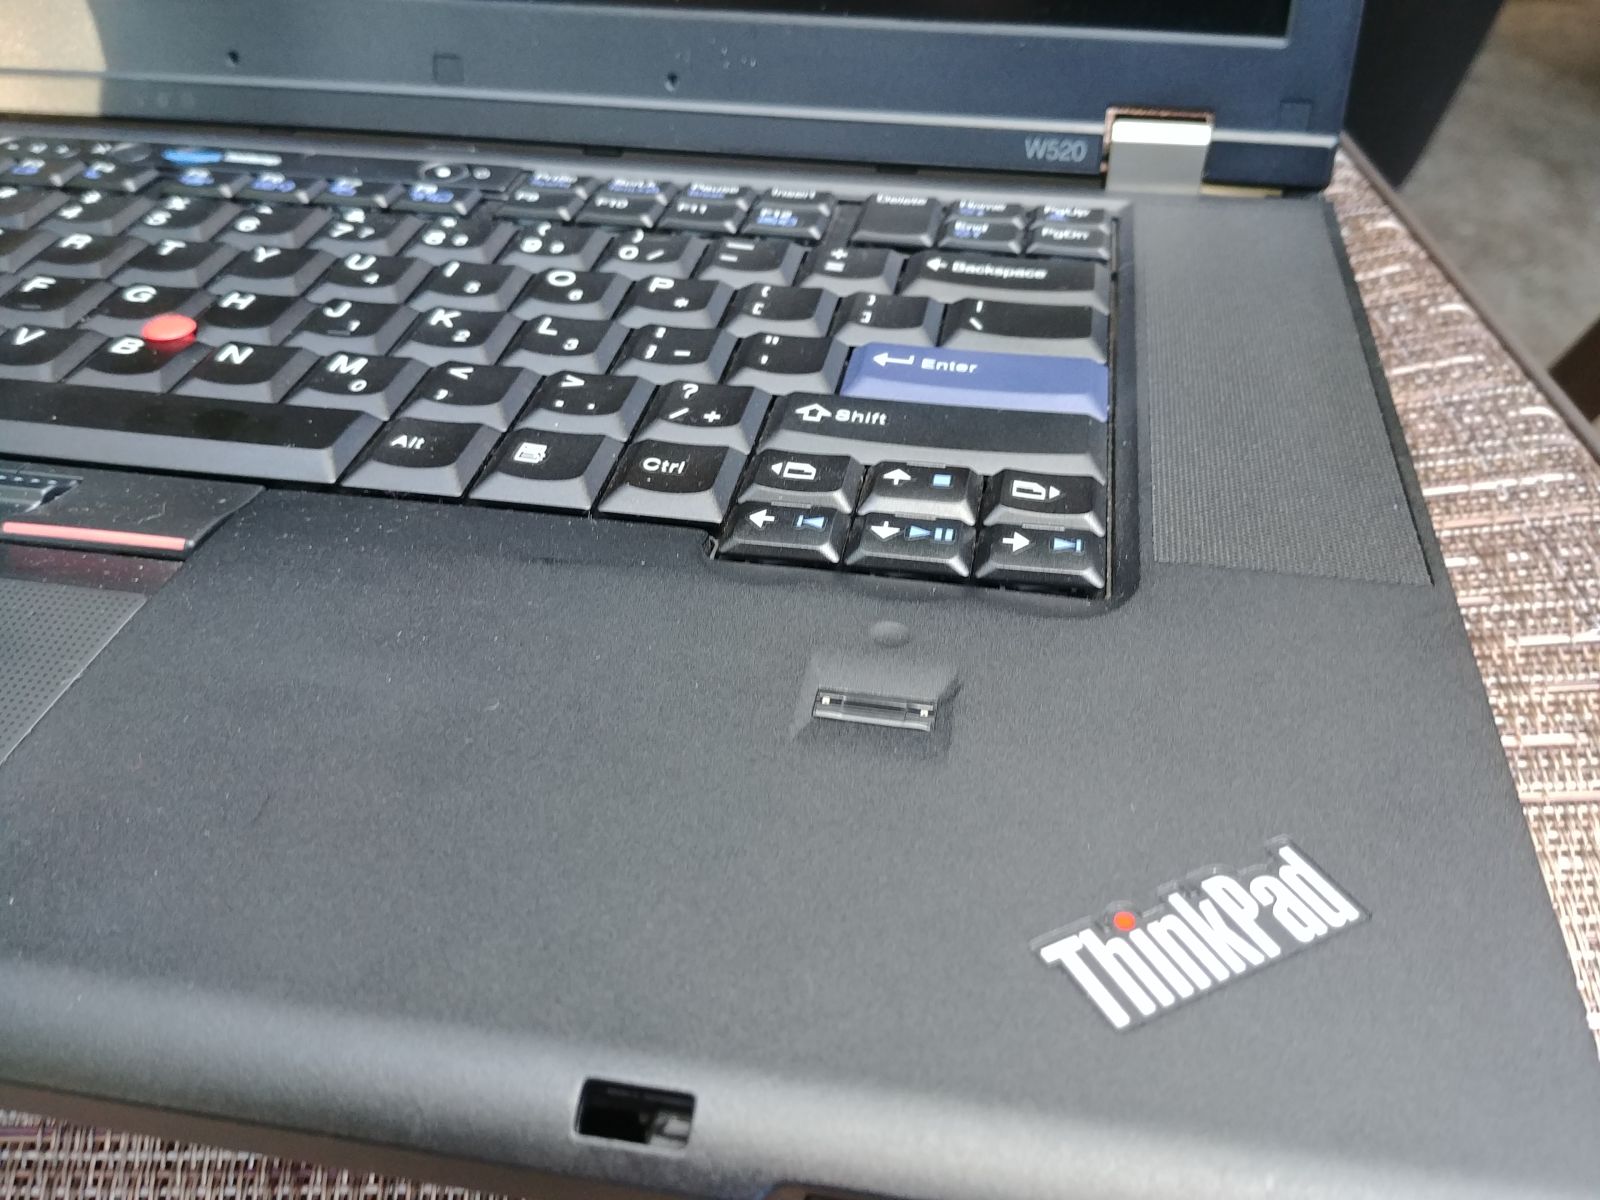 Illustration for article titled New (used) Thinkpad is in and much better! If only Windows would play nice...